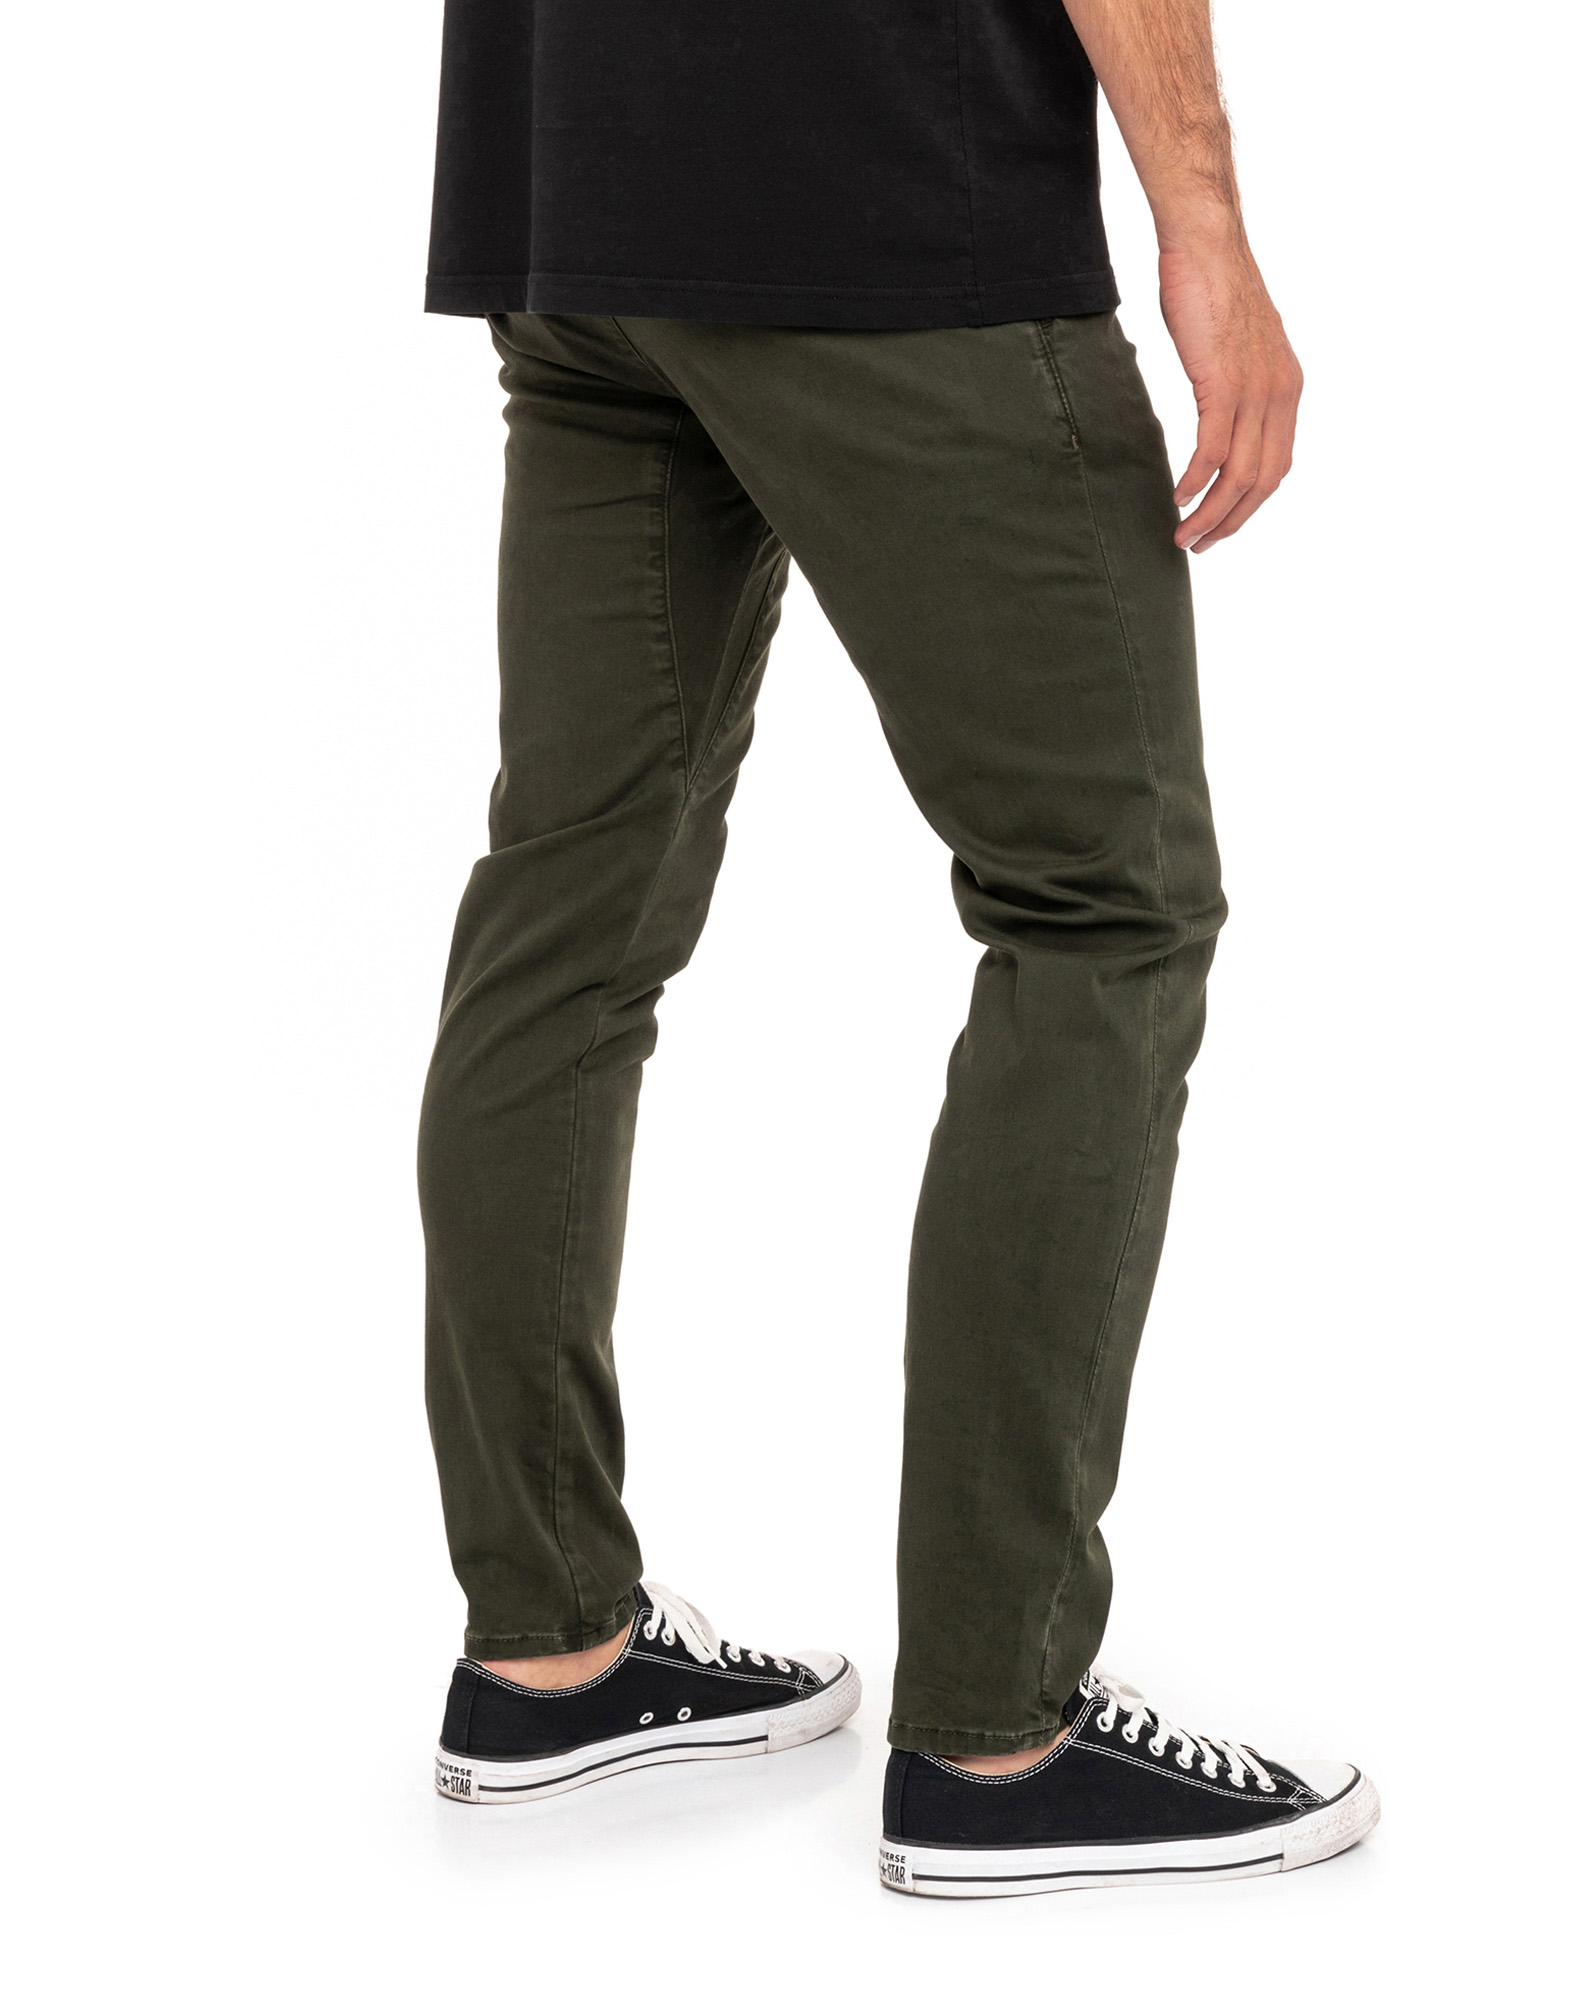 Pantalon homme chino FOREST